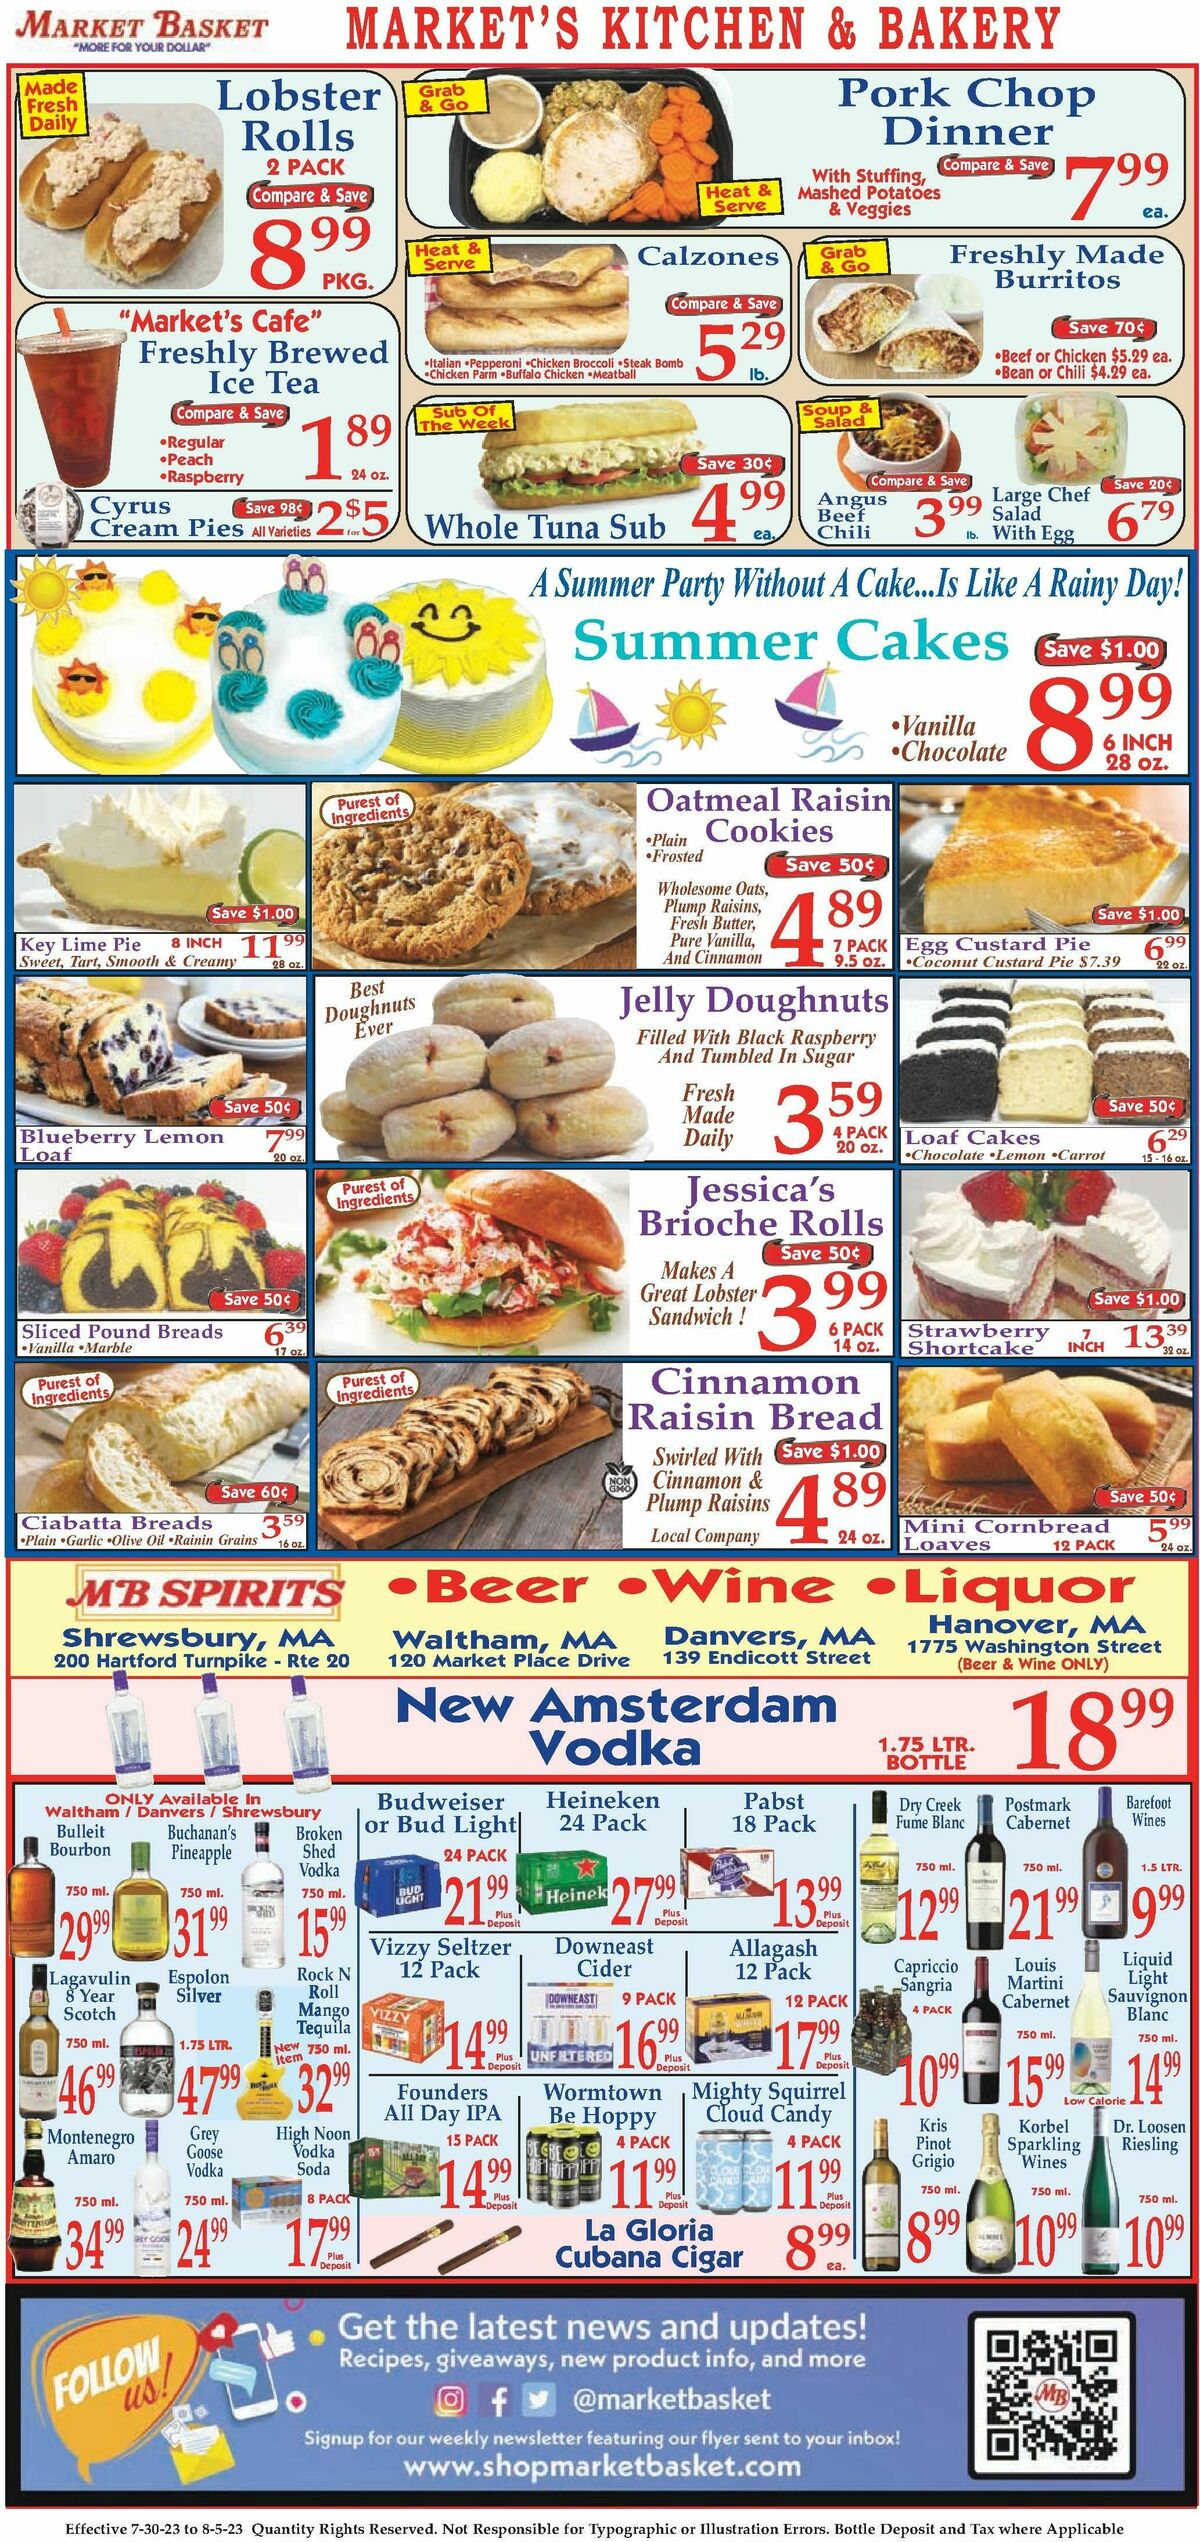 Market Basket Weekly Ad from July 30